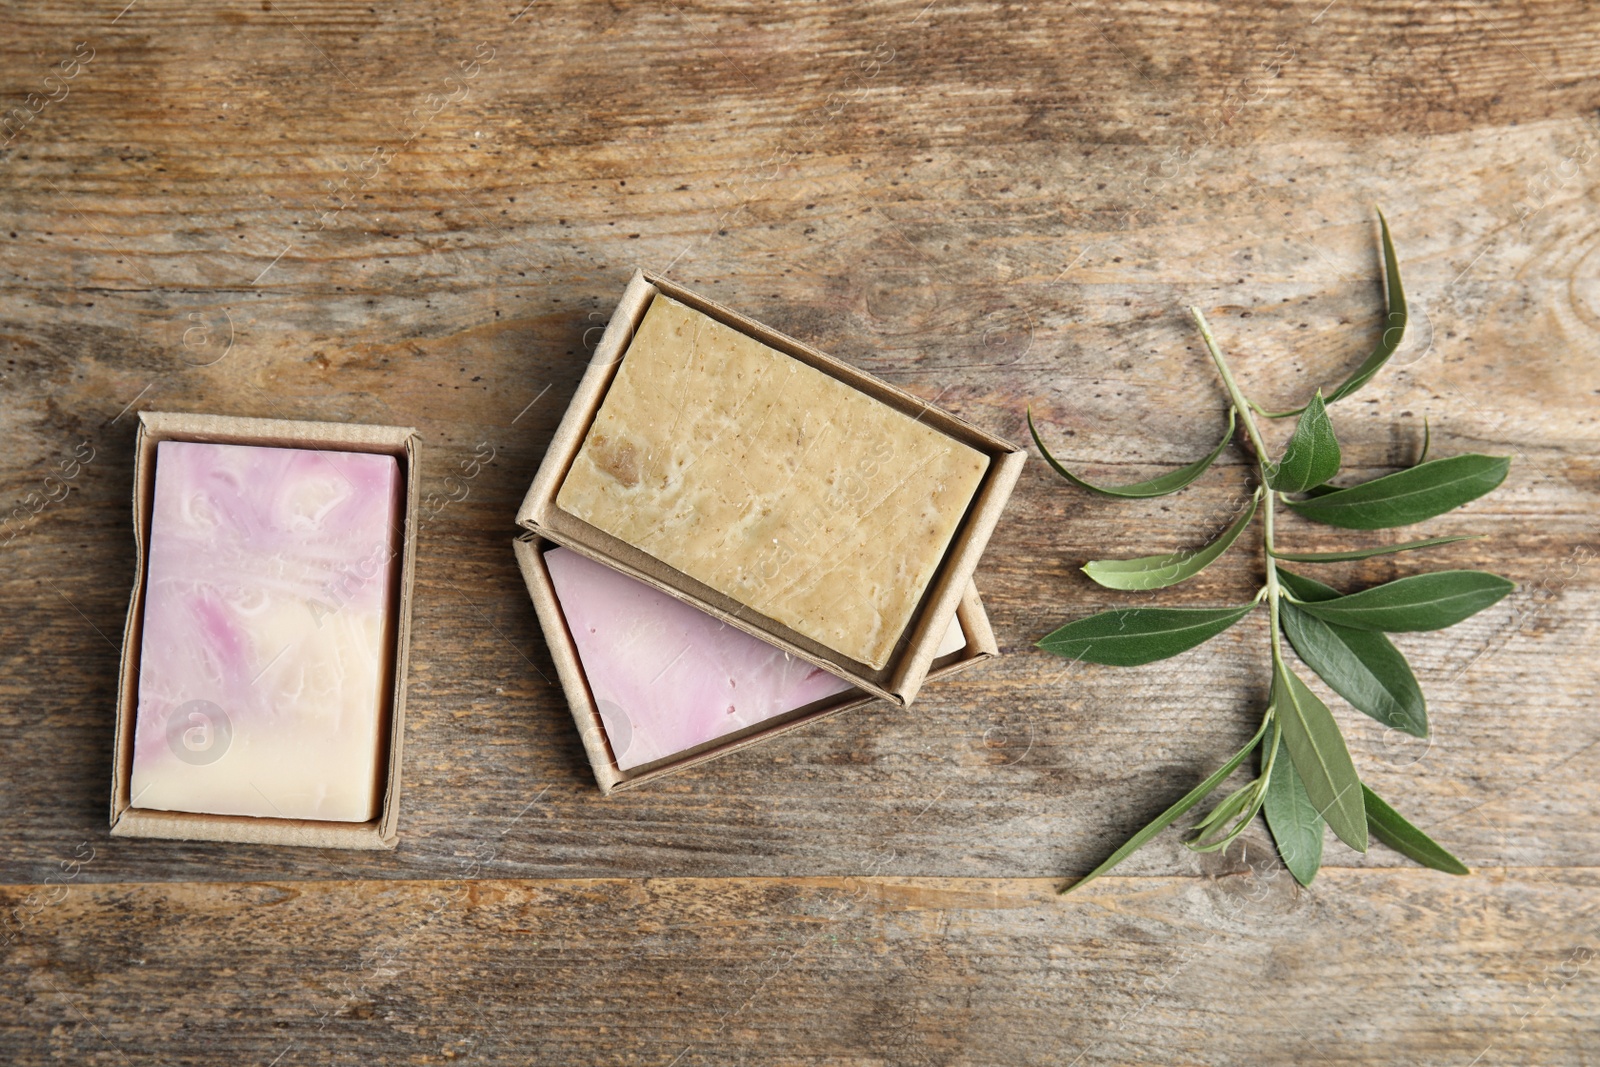 Photo of Packed handmade soap bars and olive twig on wooden table, top view